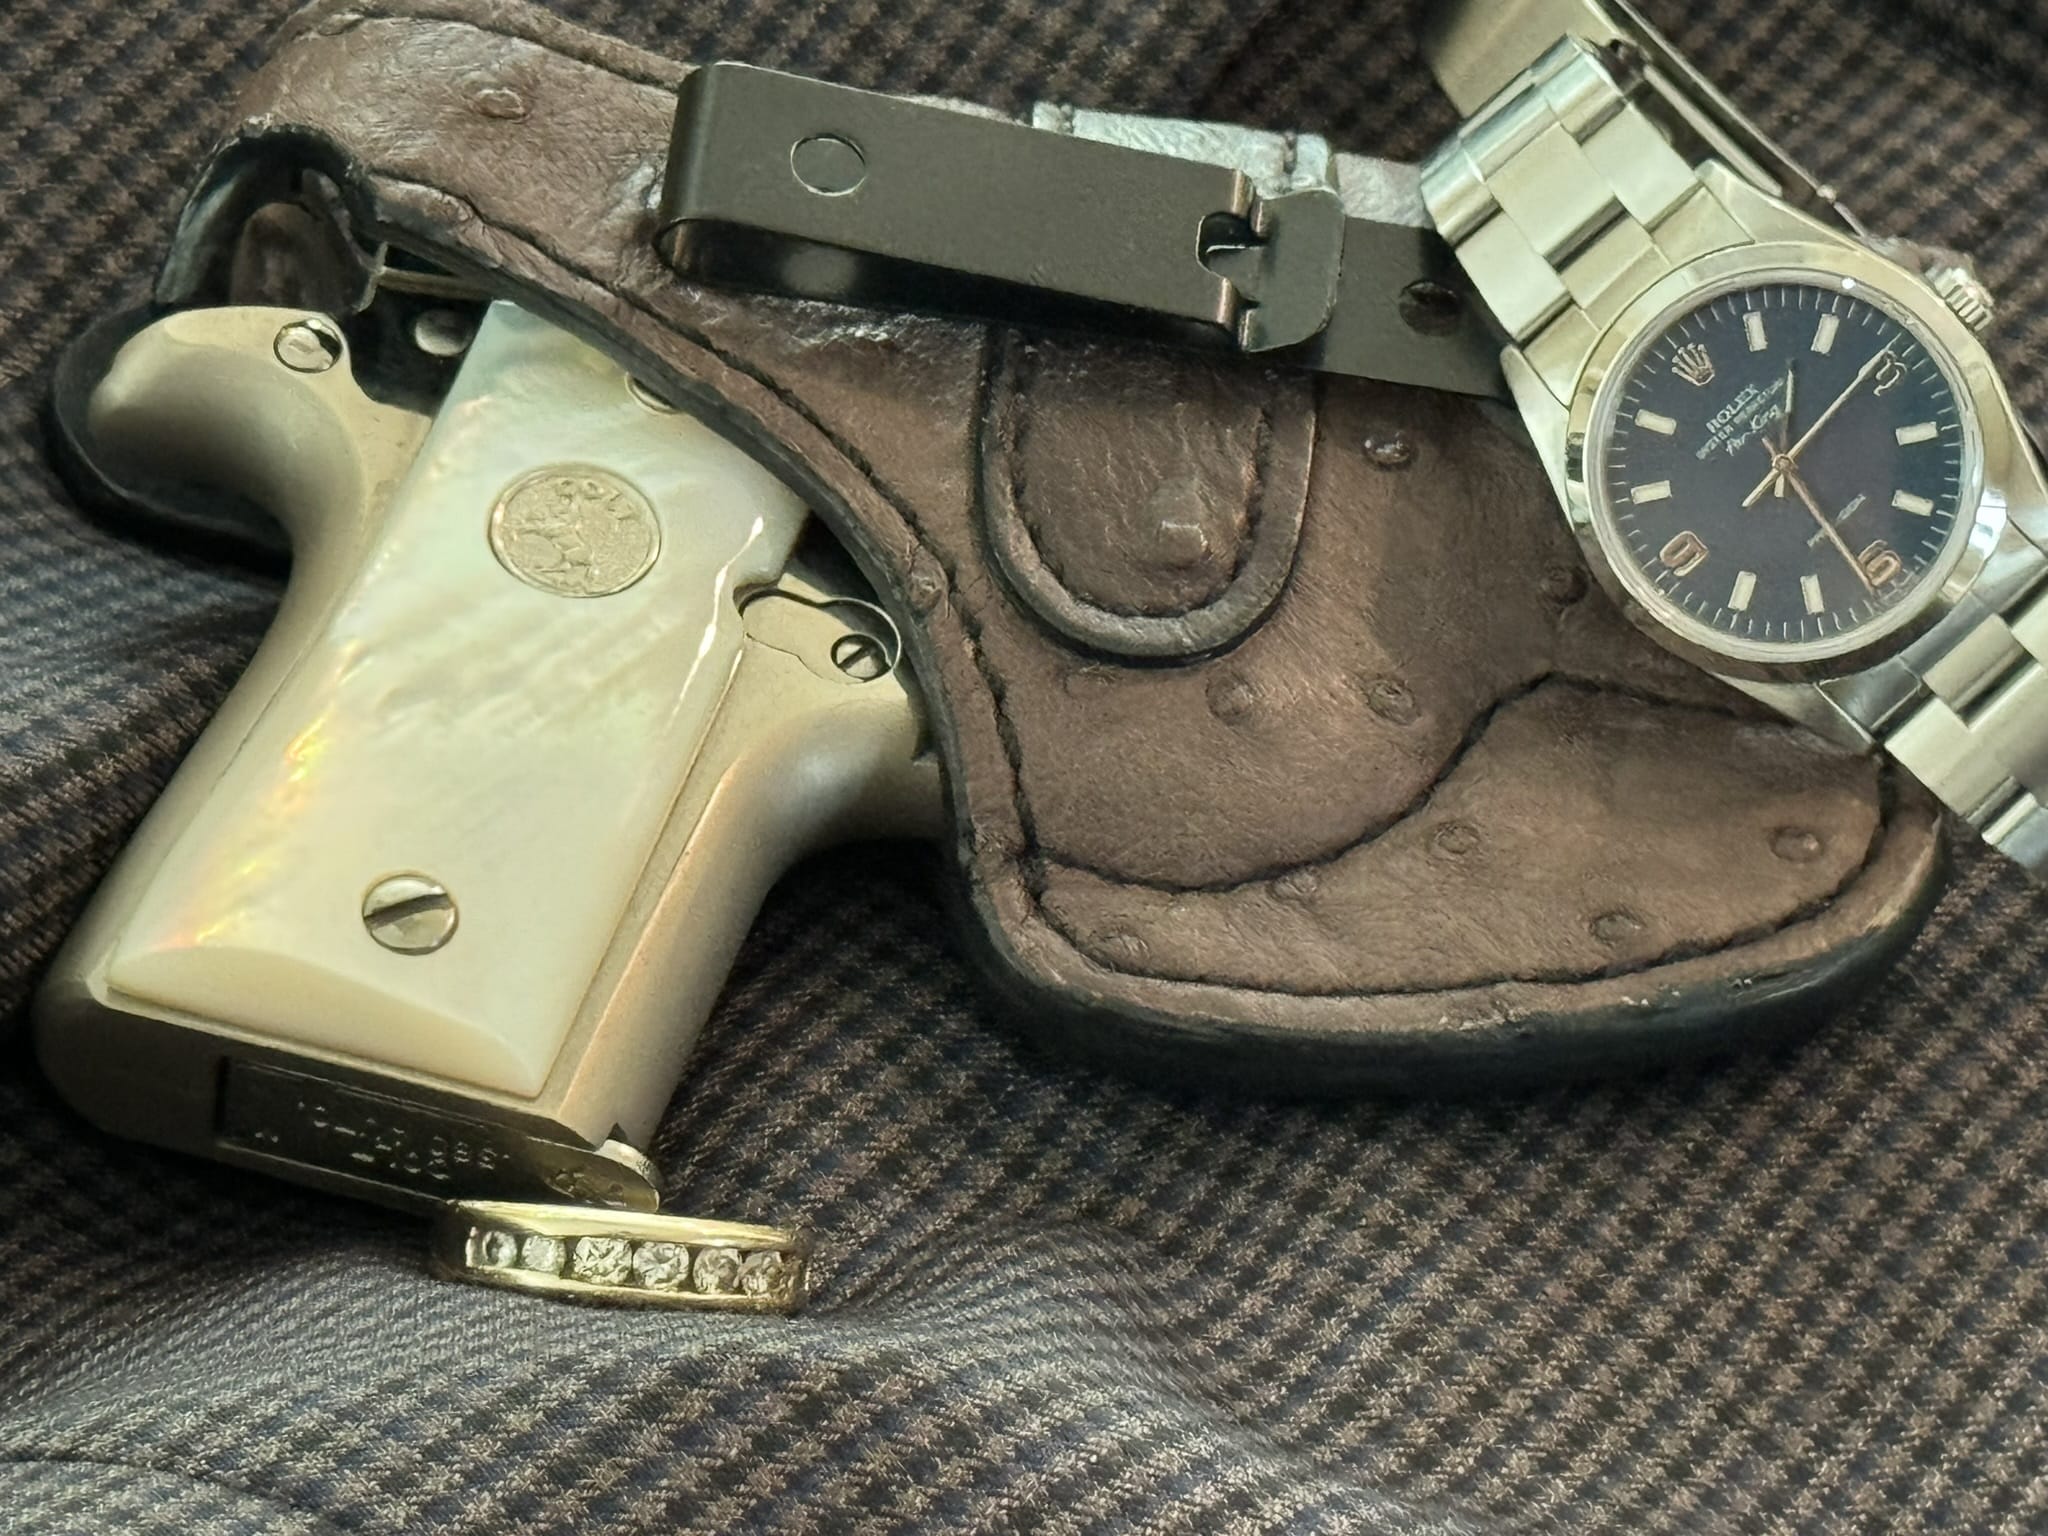 Colt Mustang, Rolex and wedding ring 